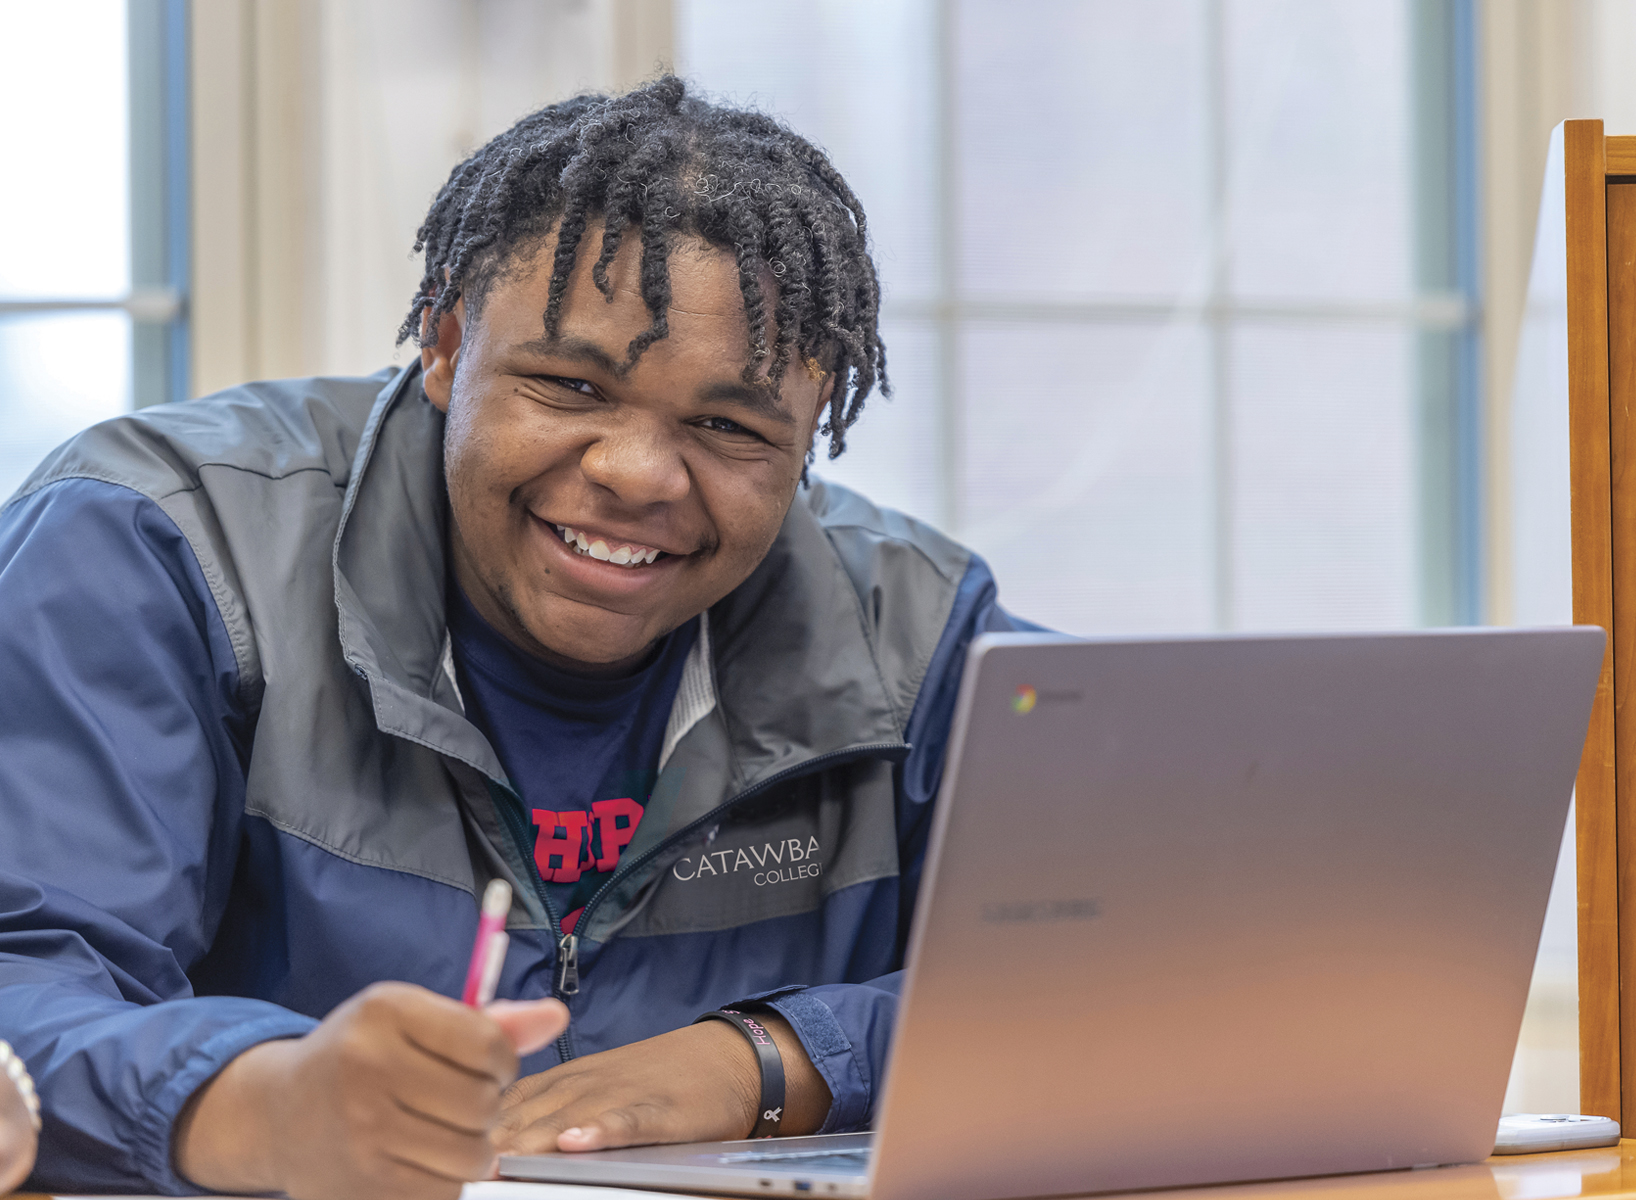 Student in class with laptop smiling